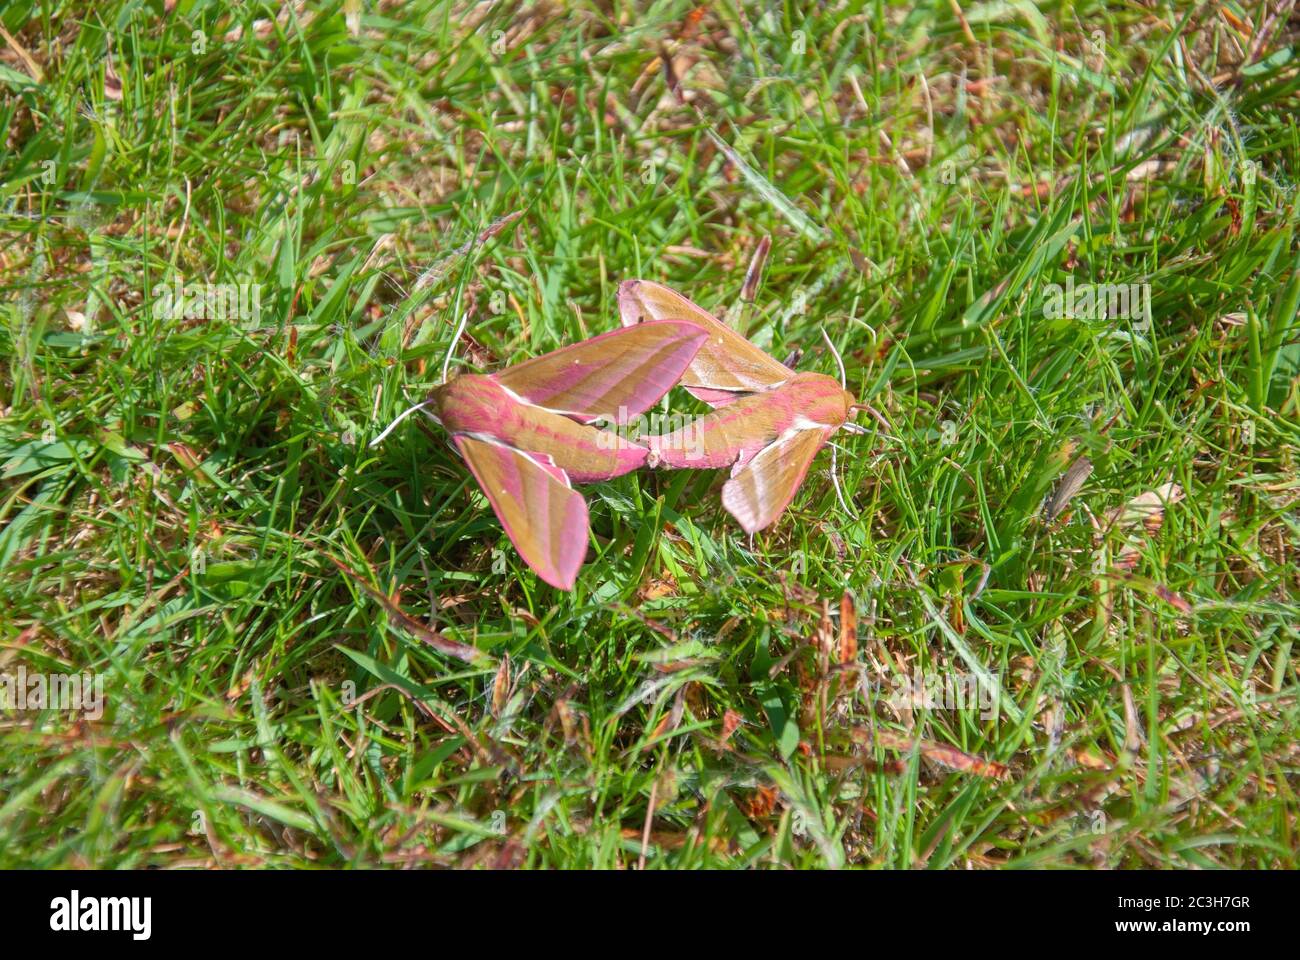 Two Elephant Hawk Moths Mating on the Grass close up landscape view of a pair couple duo pink green colour elephant hawk moths family Sphingidae deile Stock Photo